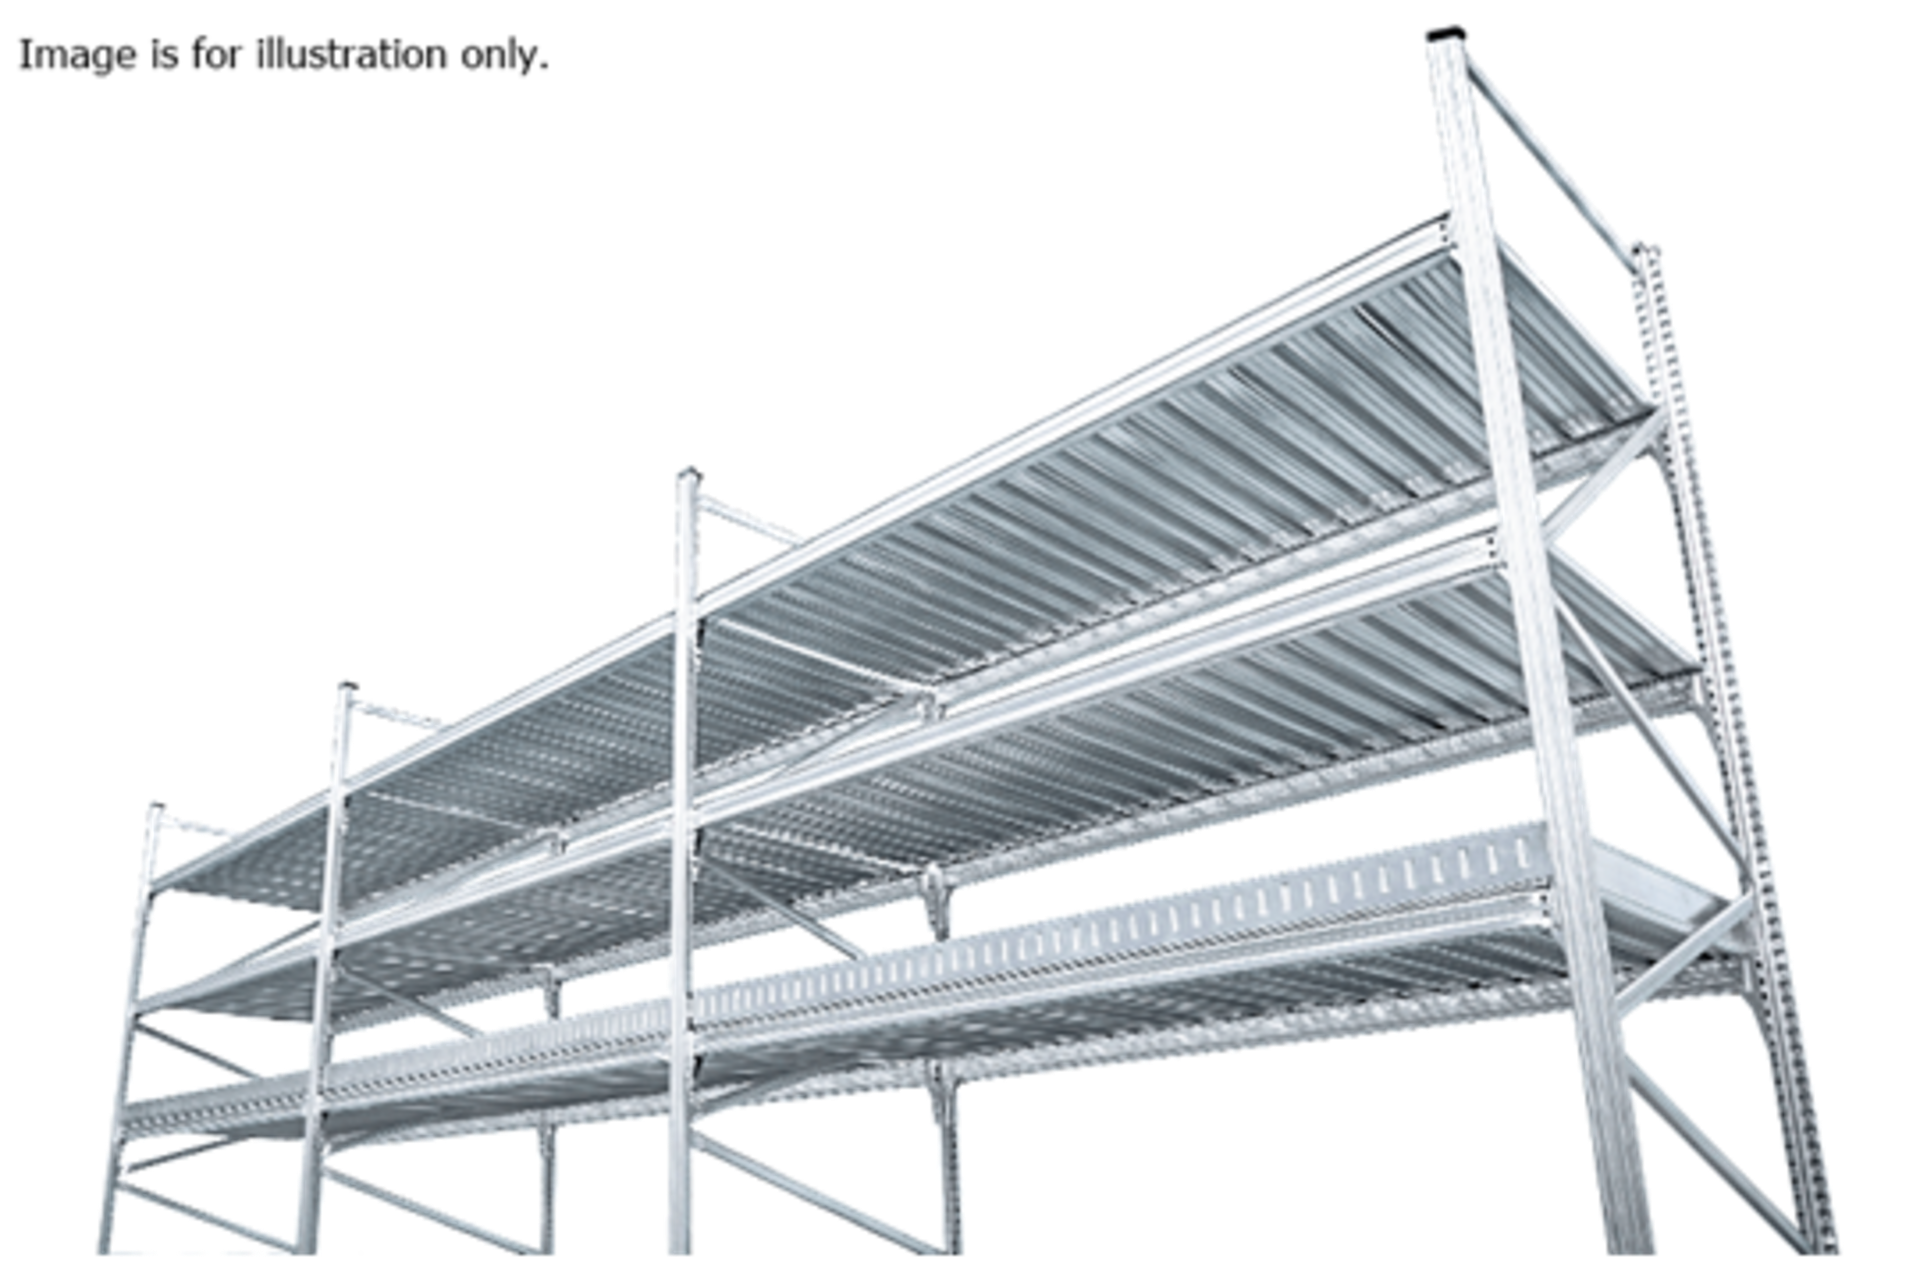 4 x Bays of Metalsistem Steel Modular Storage Shelving - Includes 53 Pieces - Recently Removed